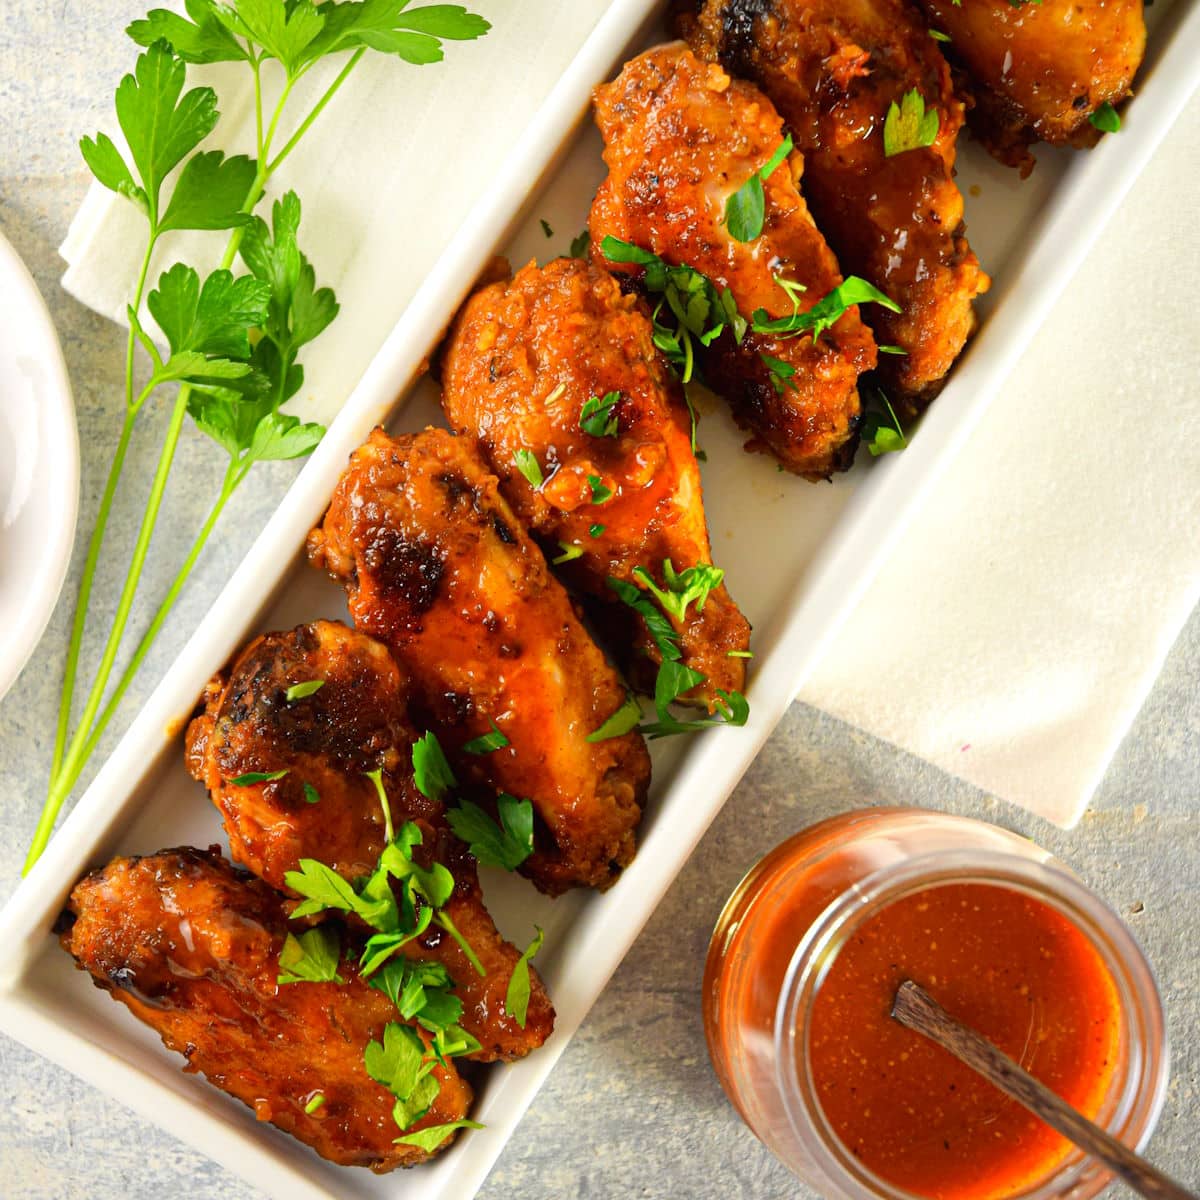 BBQ buffalo wings in dish with sauce on the side.